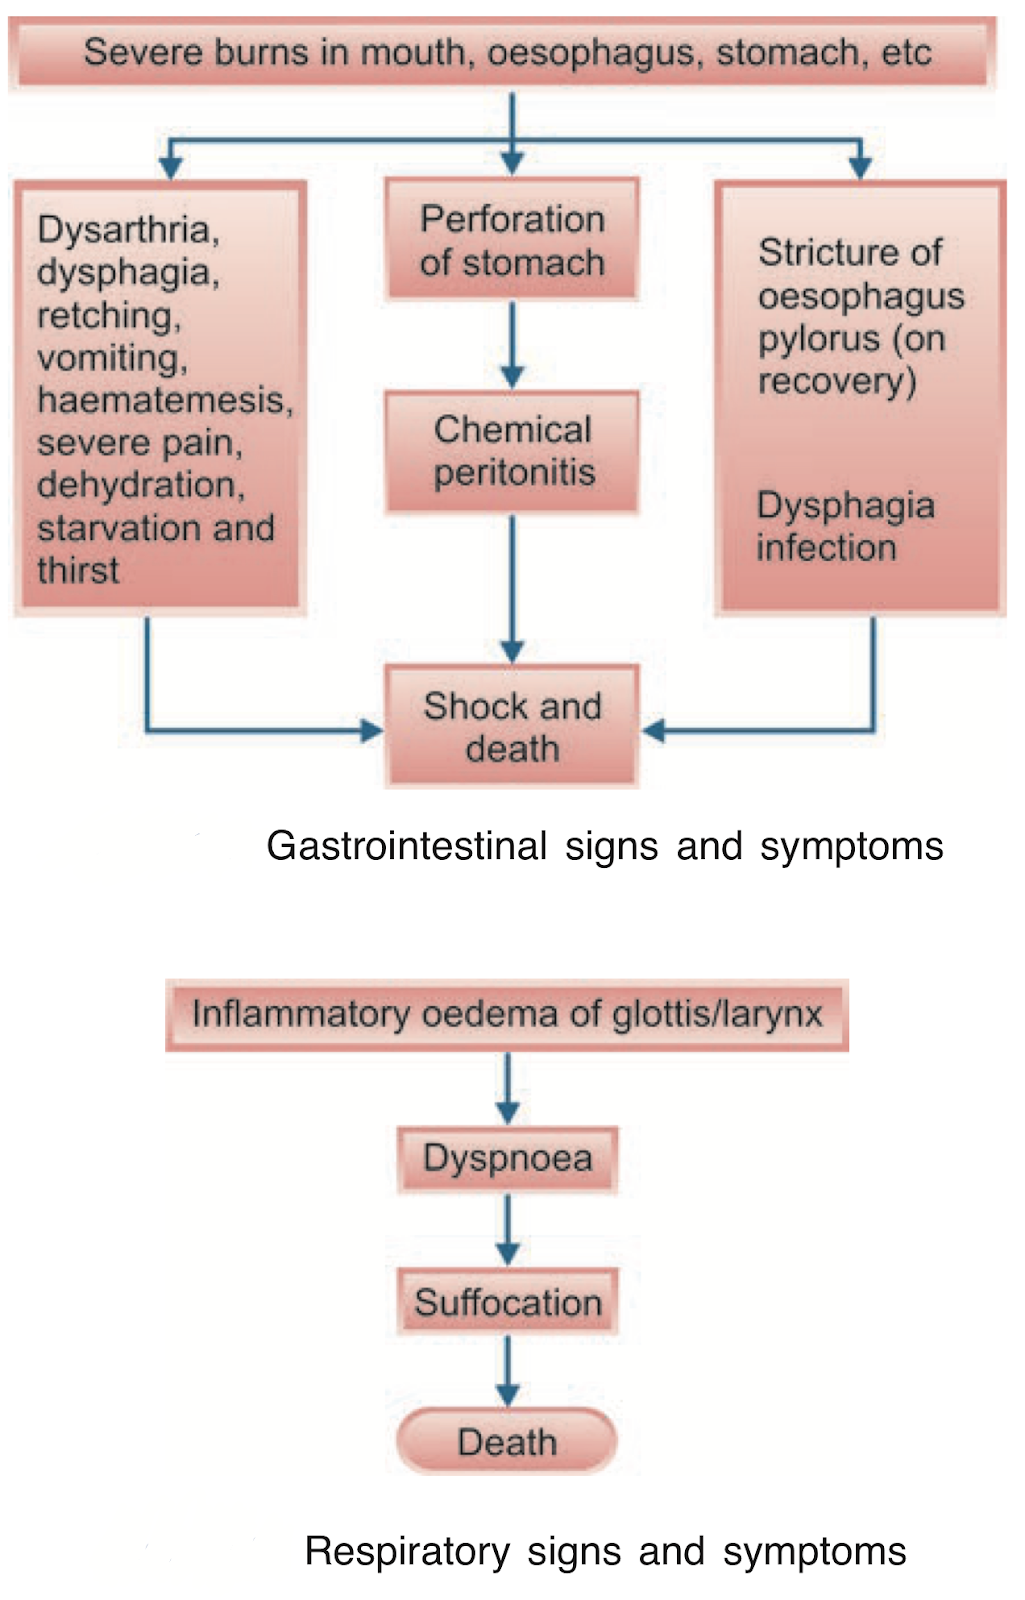 Gastrointestinal and Respiratory Signs and Symptoms